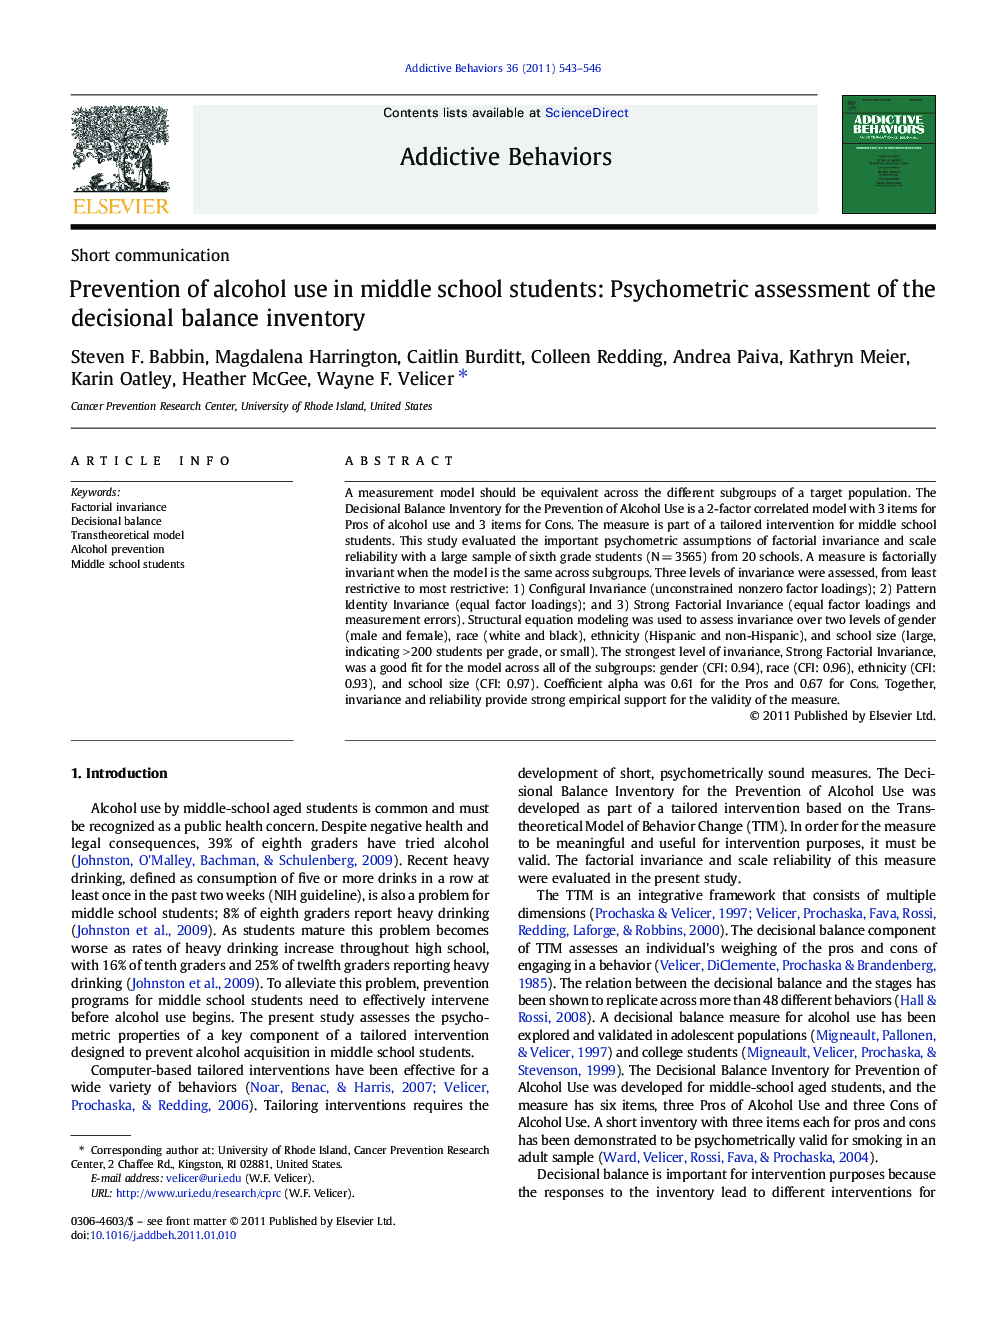 Prevention of alcohol use in middle school students: Psychometric assessment of the decisional balance inventory